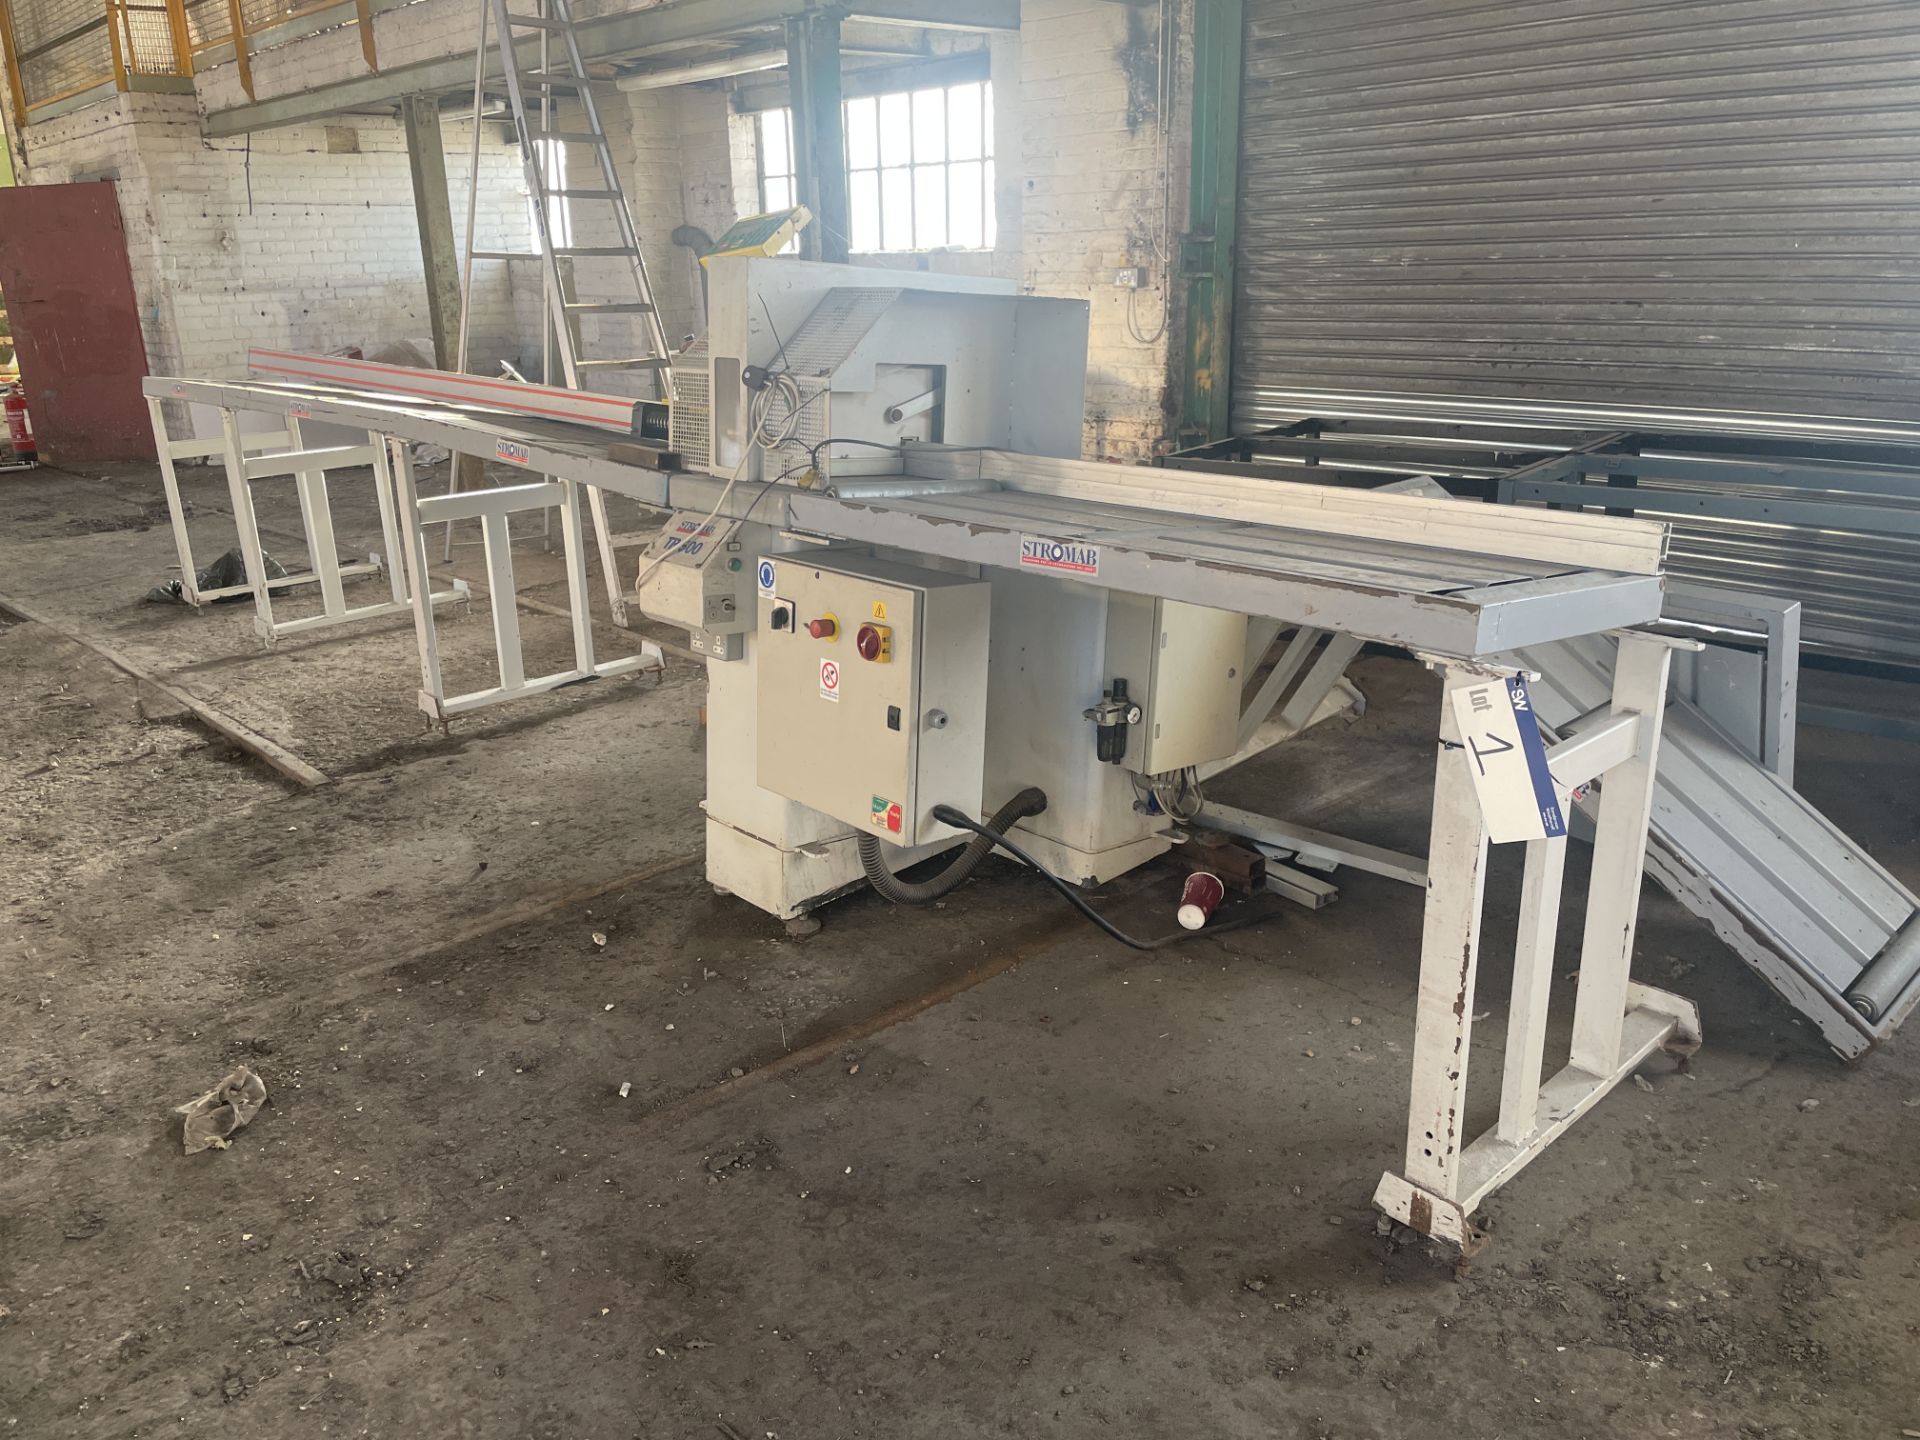 Stromab TR500 CROSS CUT SAW, serial no. 1377, year of manufacture 2007, 415kg weight, 415V,